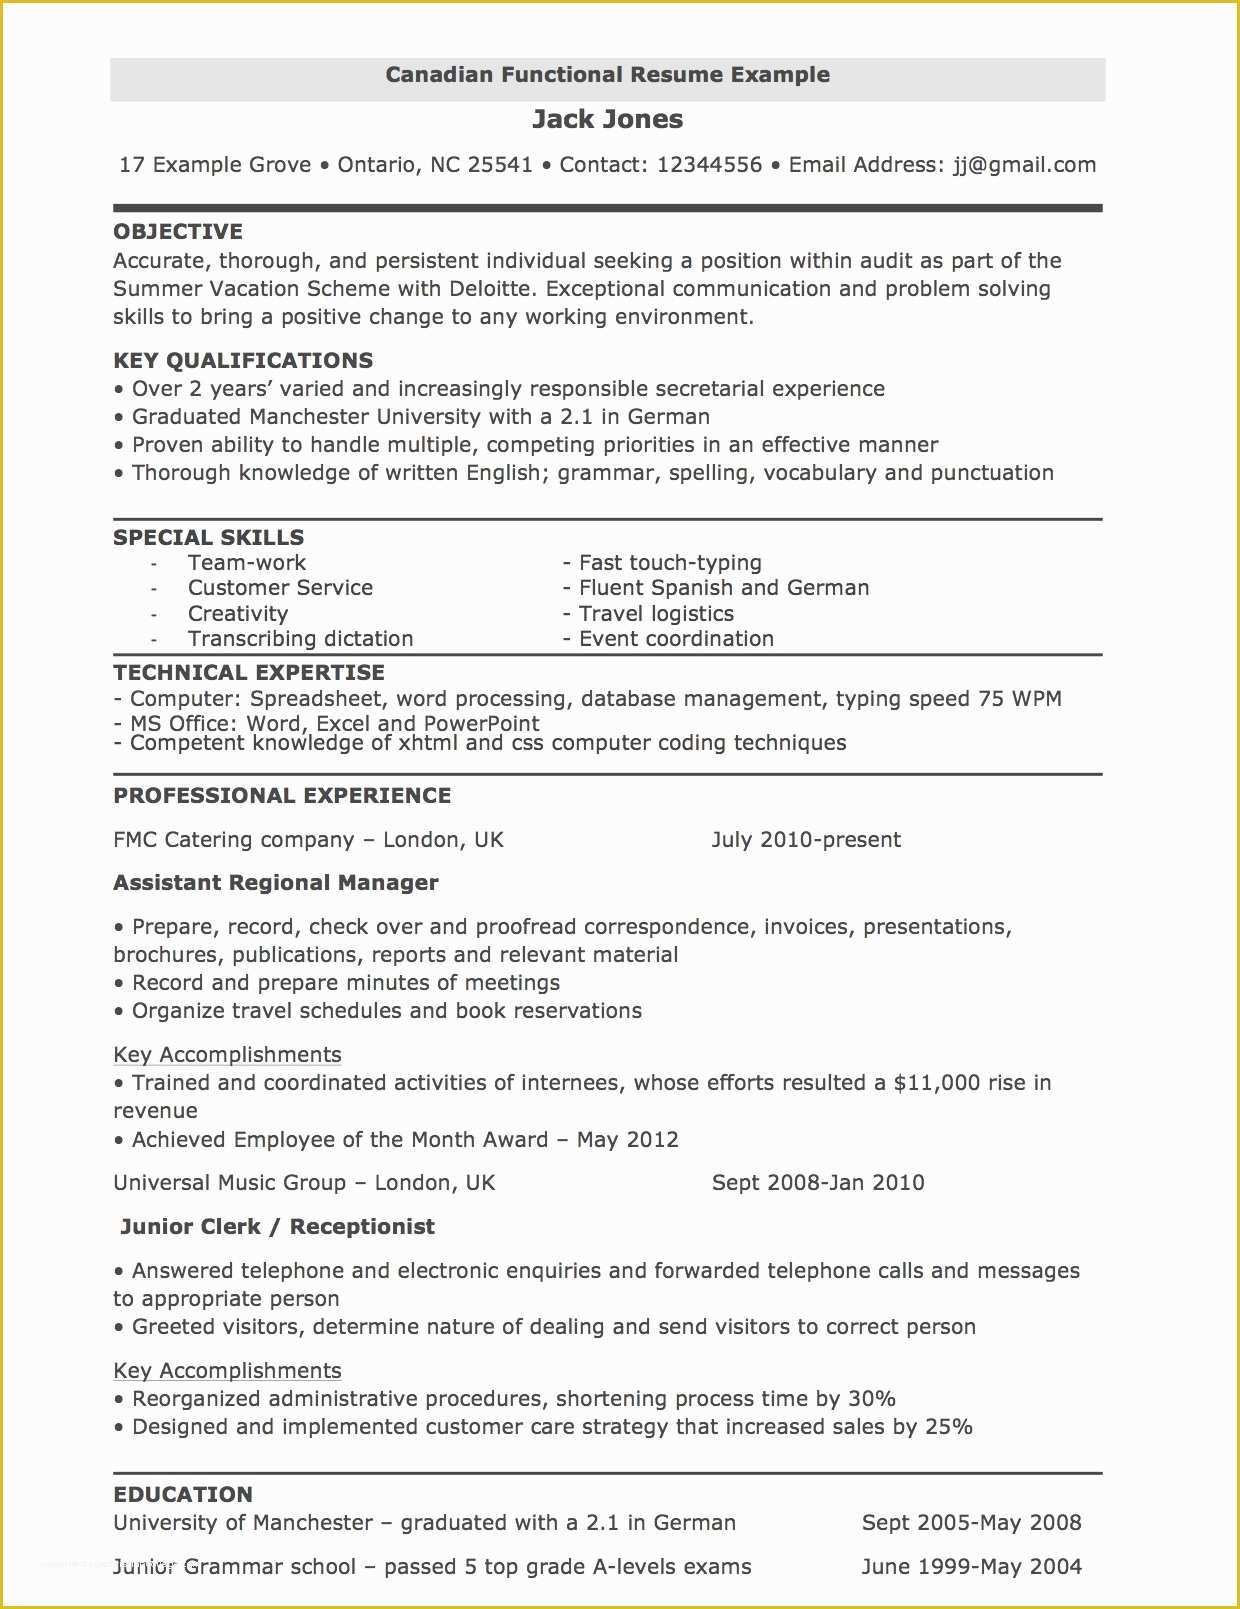 Canadian Resume Template Free Of Functional Resume for Canada